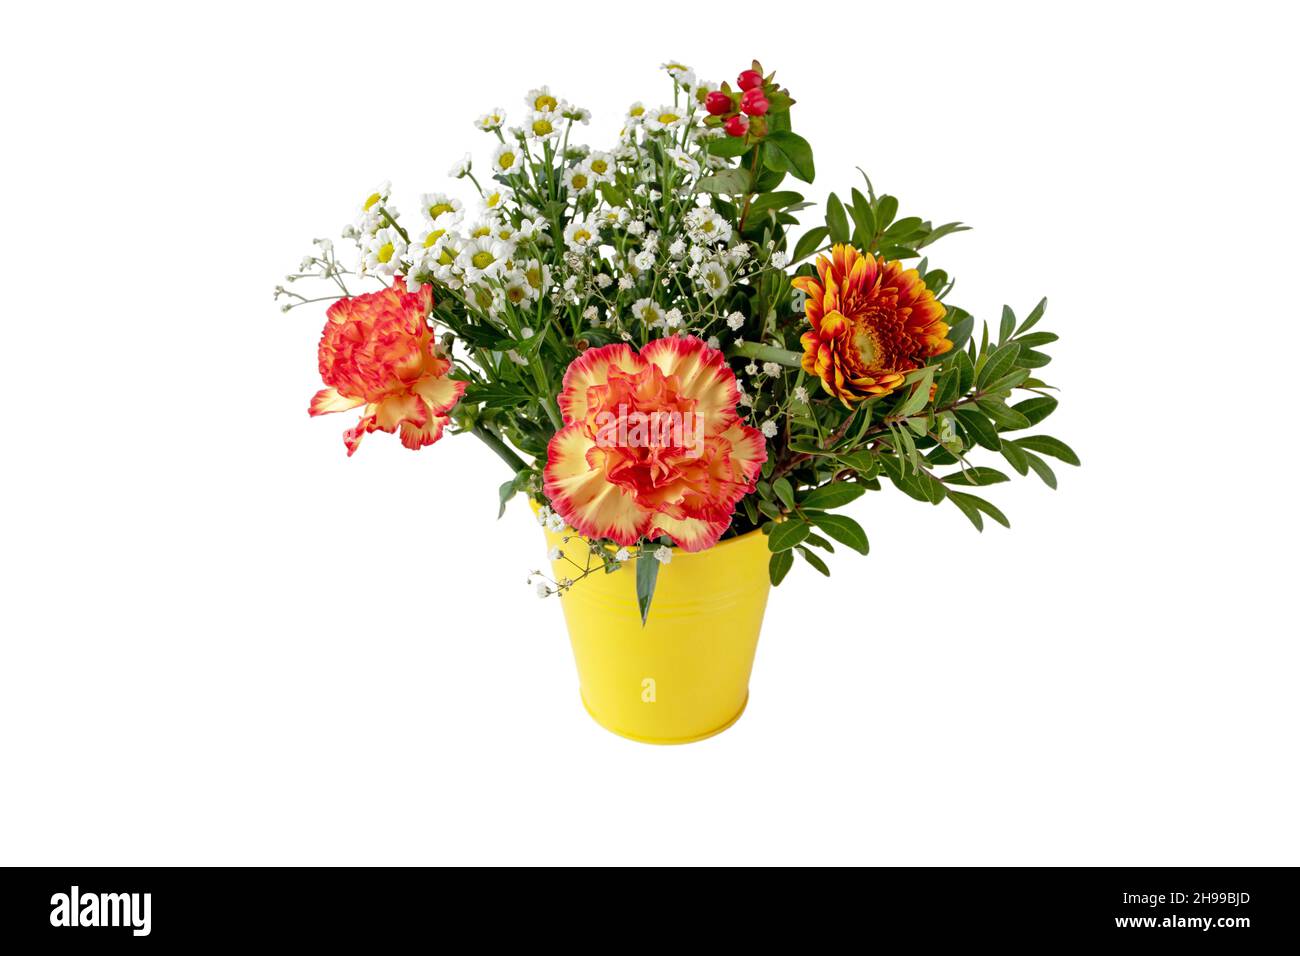 Bright flowers bouquet in the yellow bucket isolated on white. Gerbera,carnations or Herbera,carnation,gypsophila,chrysanthemum and green decorative b Stock Photo